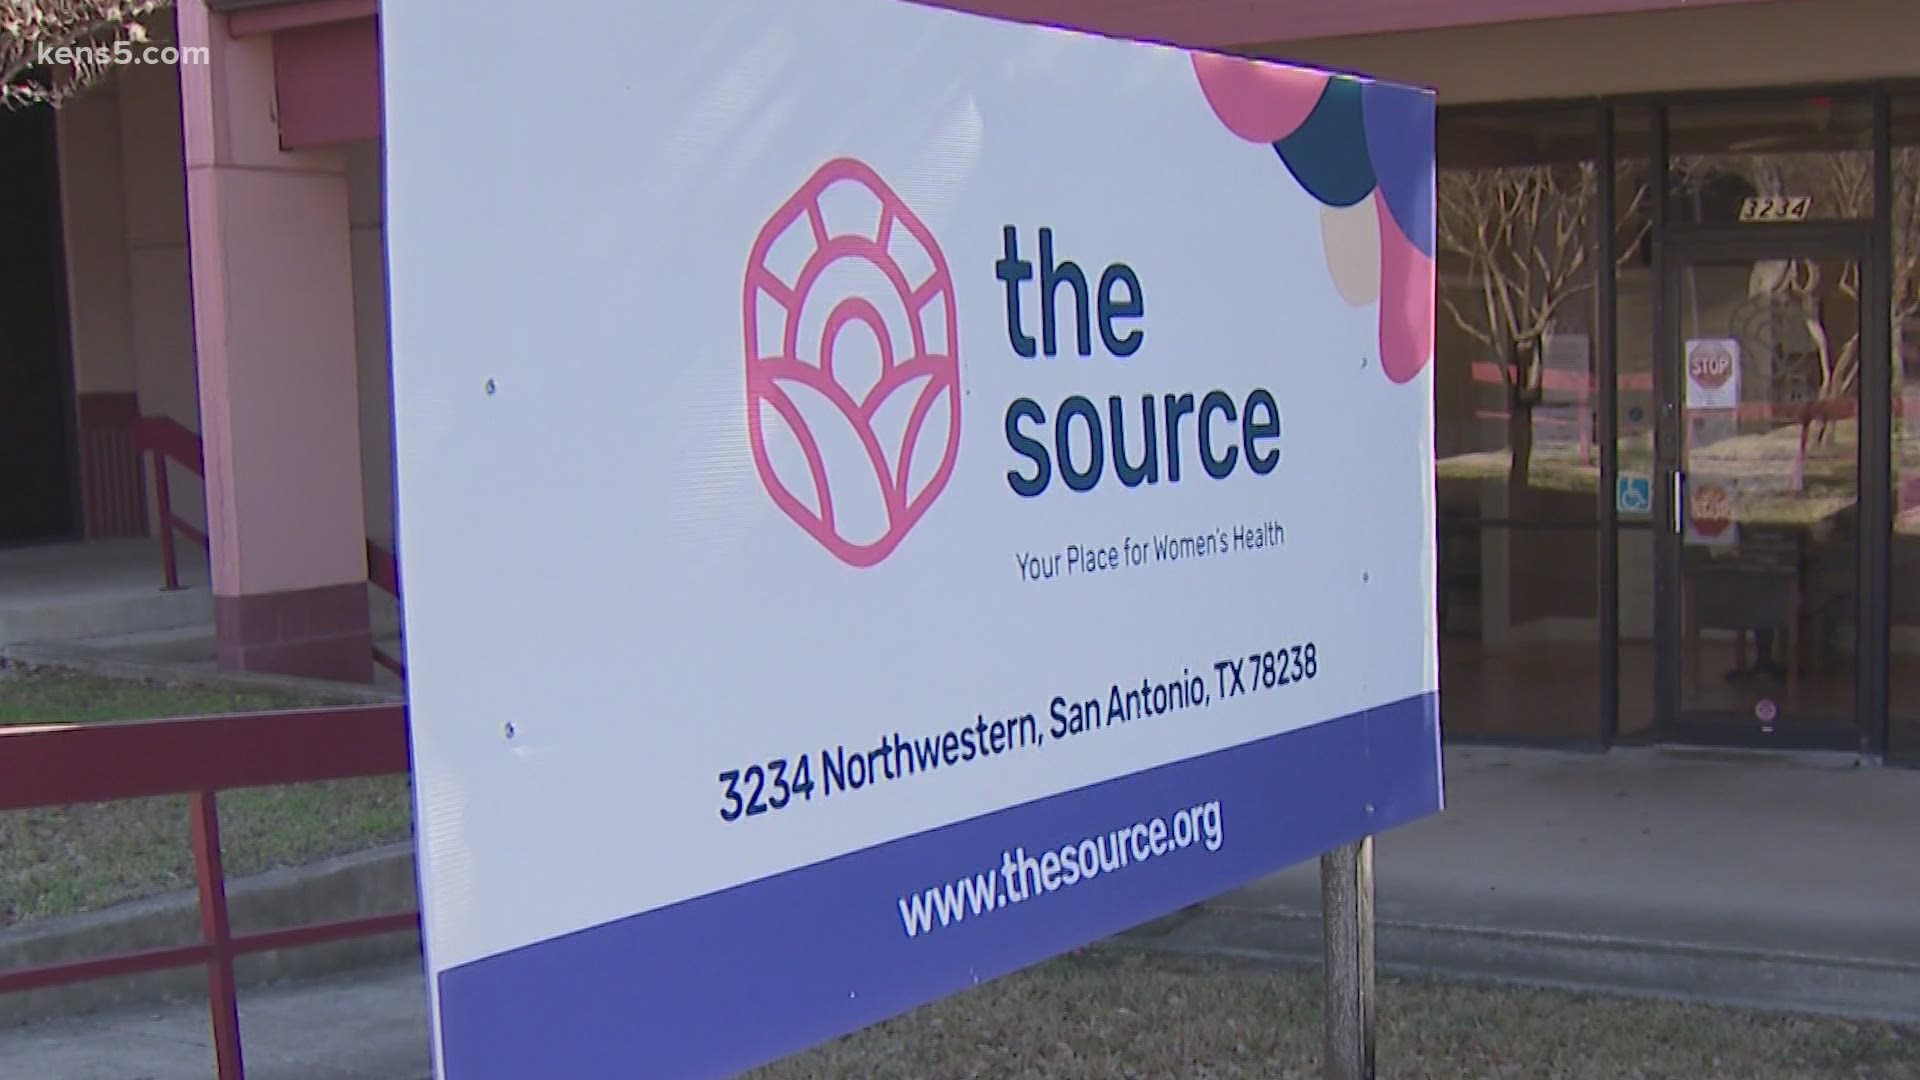 The Source has a number of programs to assist those navigating an unexpected pregnancy.